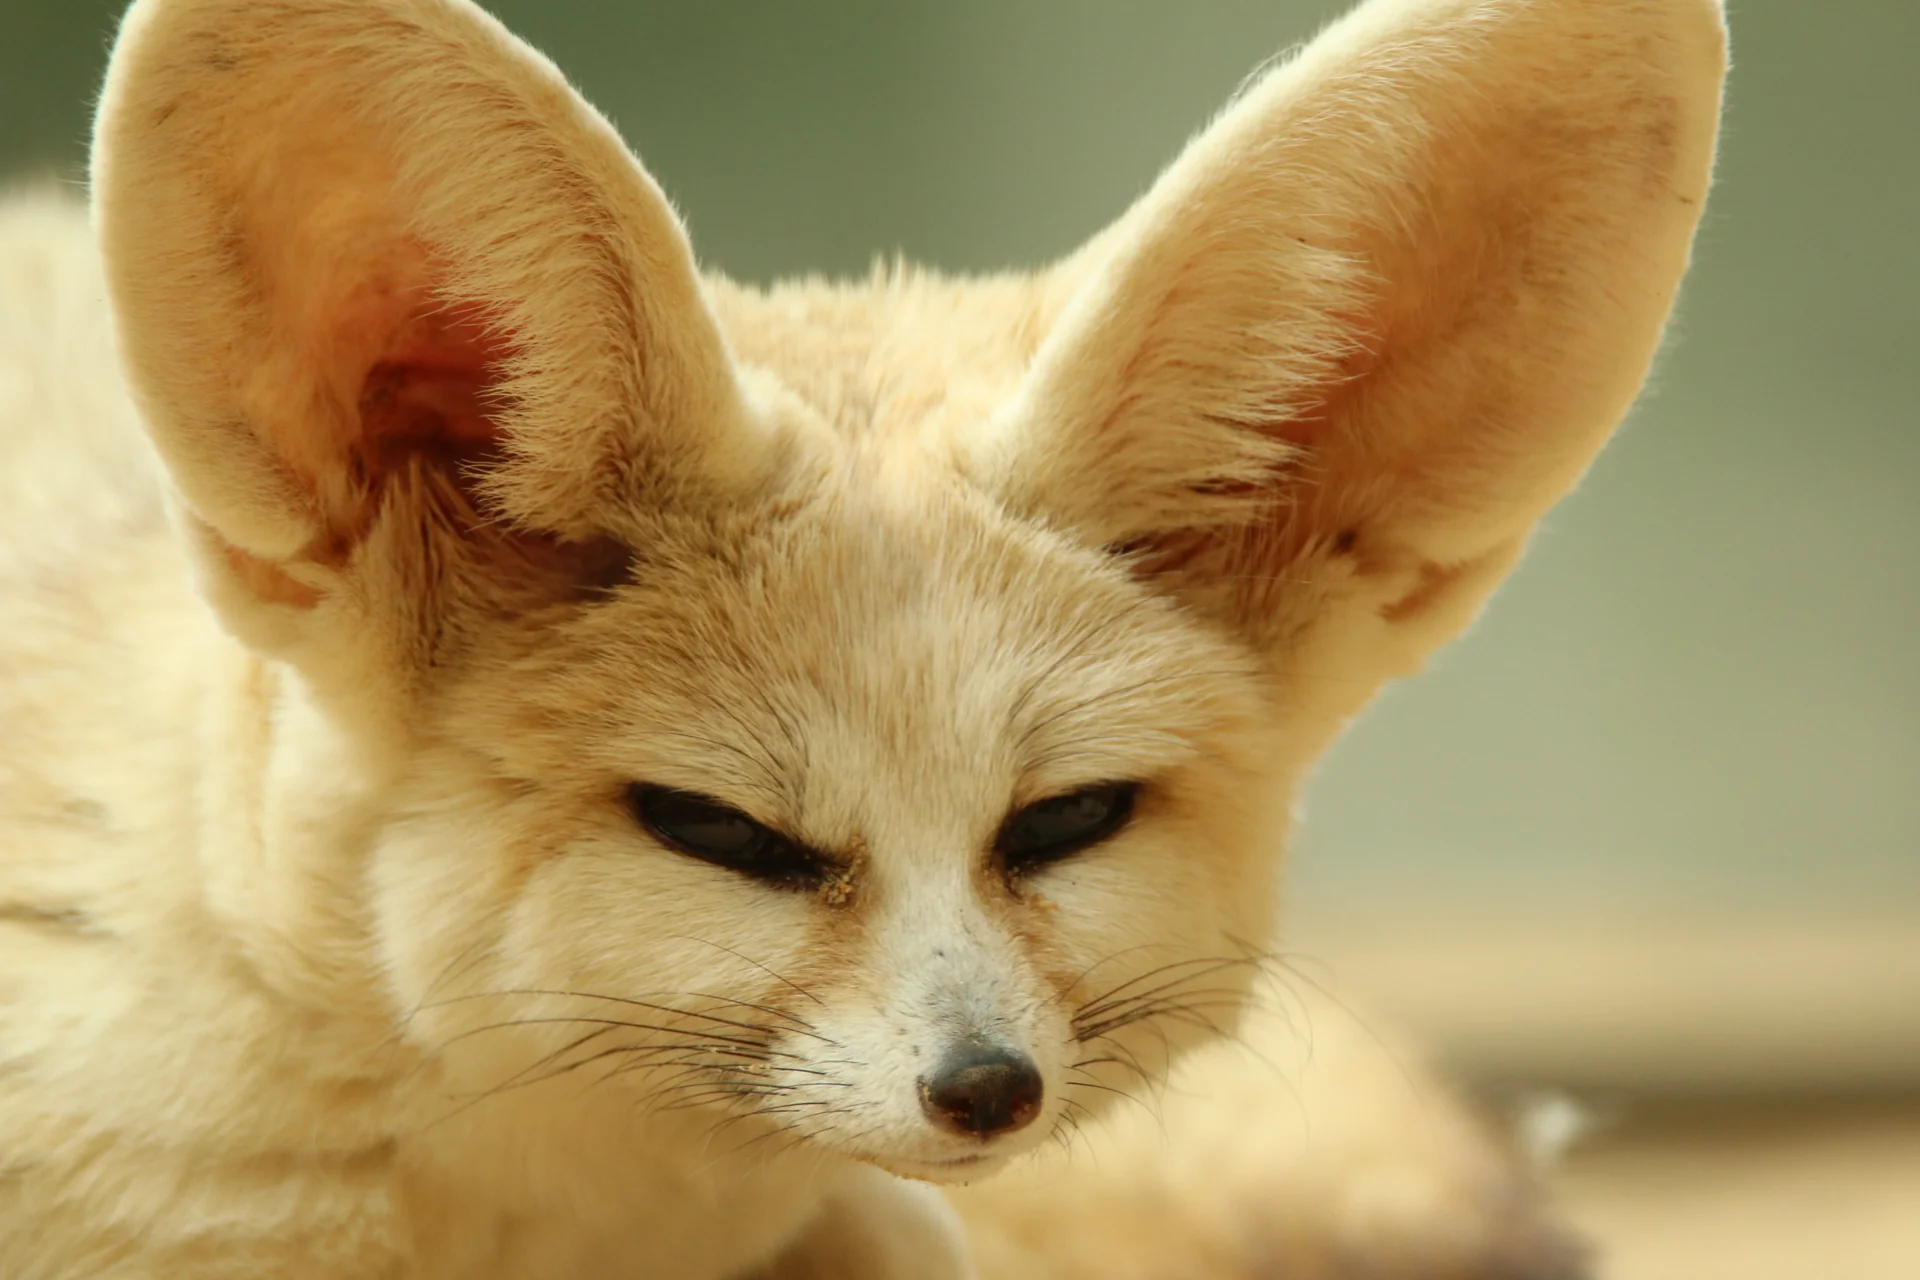 A fennec fox woken up by the camera looking directly at it. Doesn't seem to be much awake.